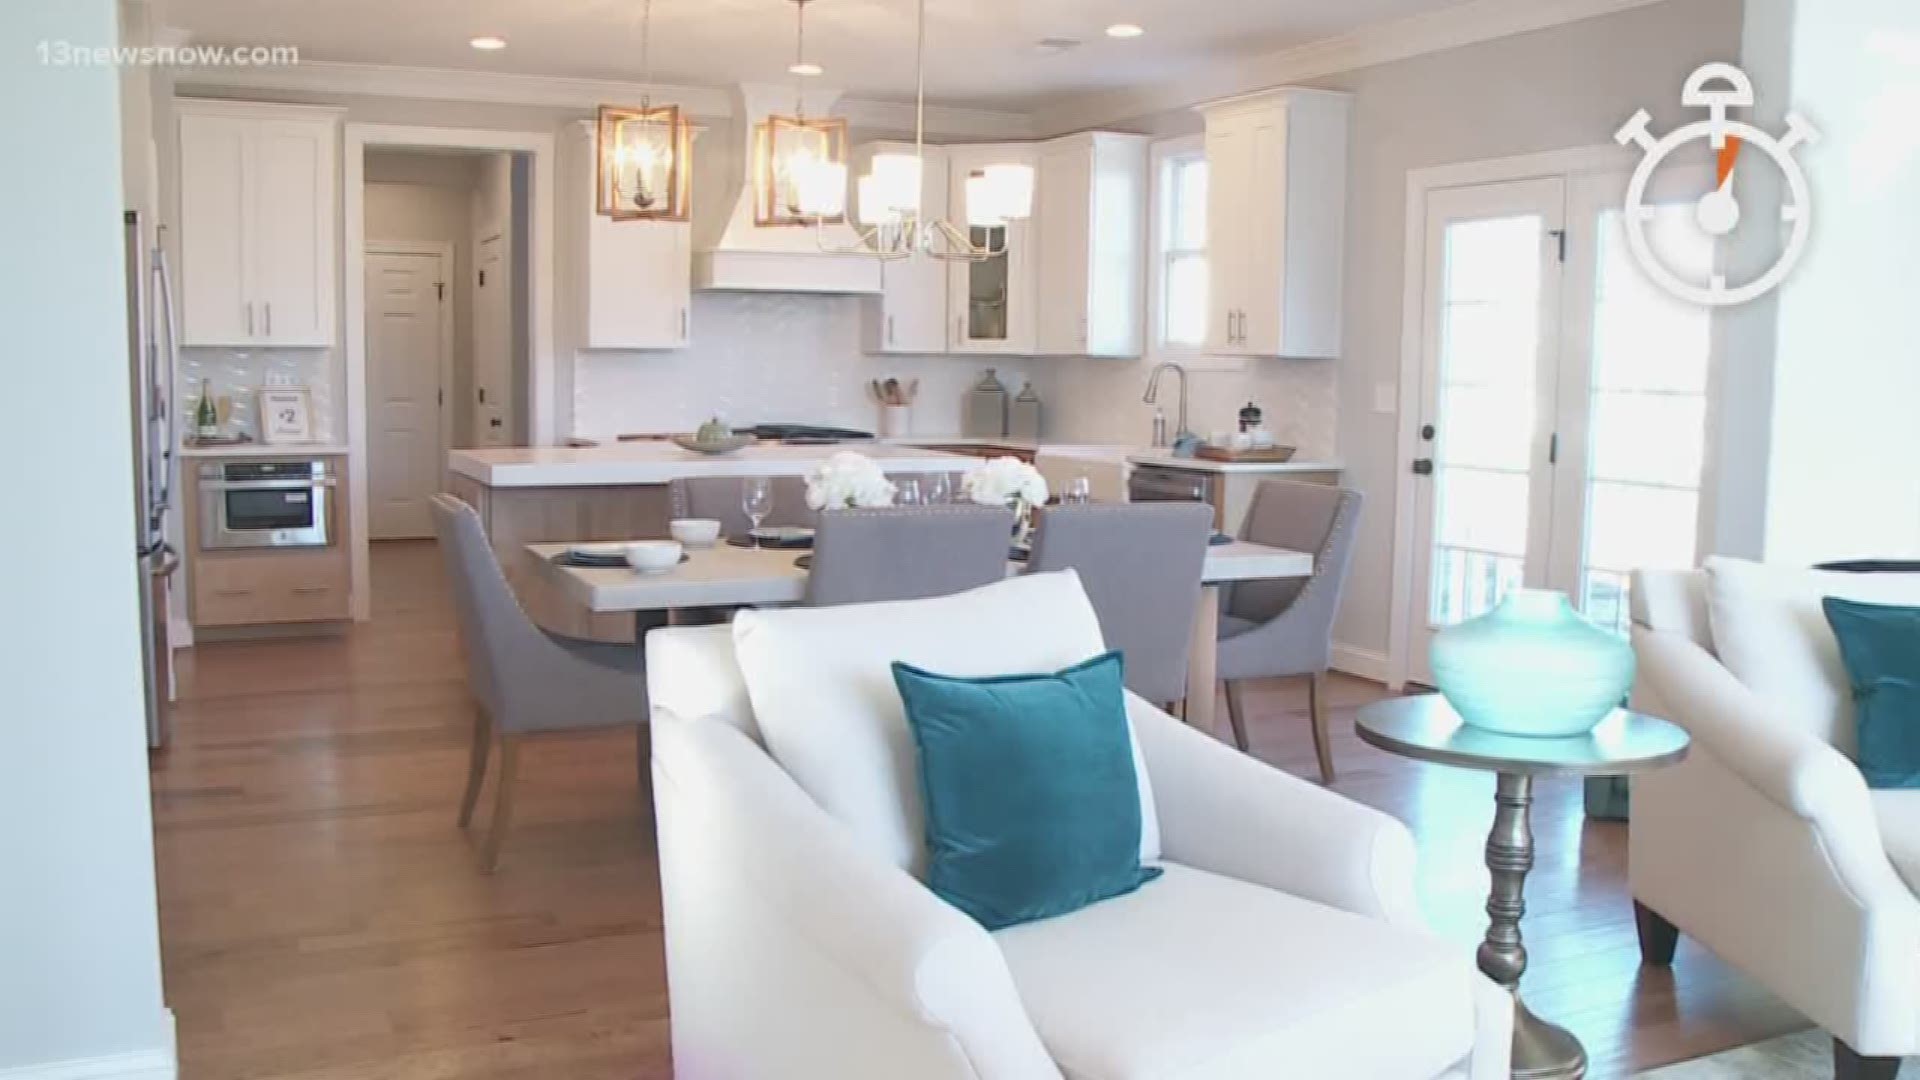 Homearama showcases the newest and best homes in Hampton Roads. The event is underway in Chesapeake and runs through Nov. 10 at Culpepper Landing.